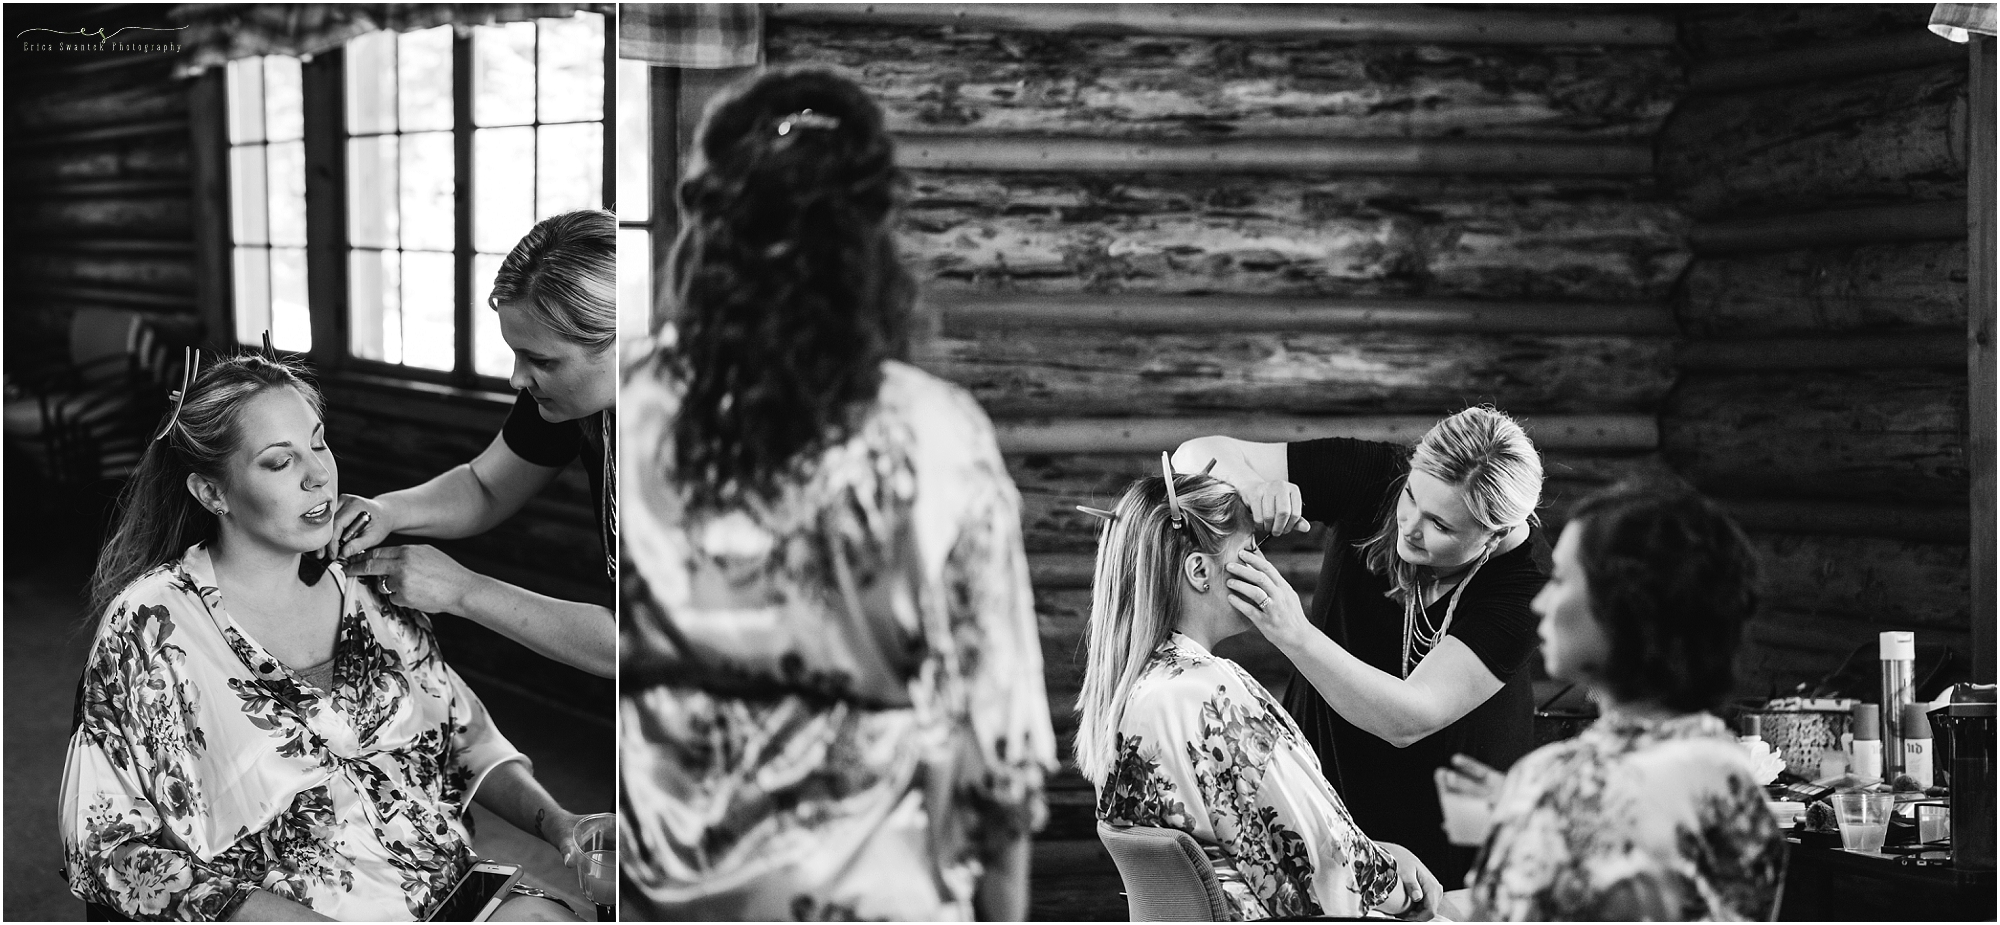 Bend makeup artist prepping the bride to be at this rustic Oregon lodge wedding. 